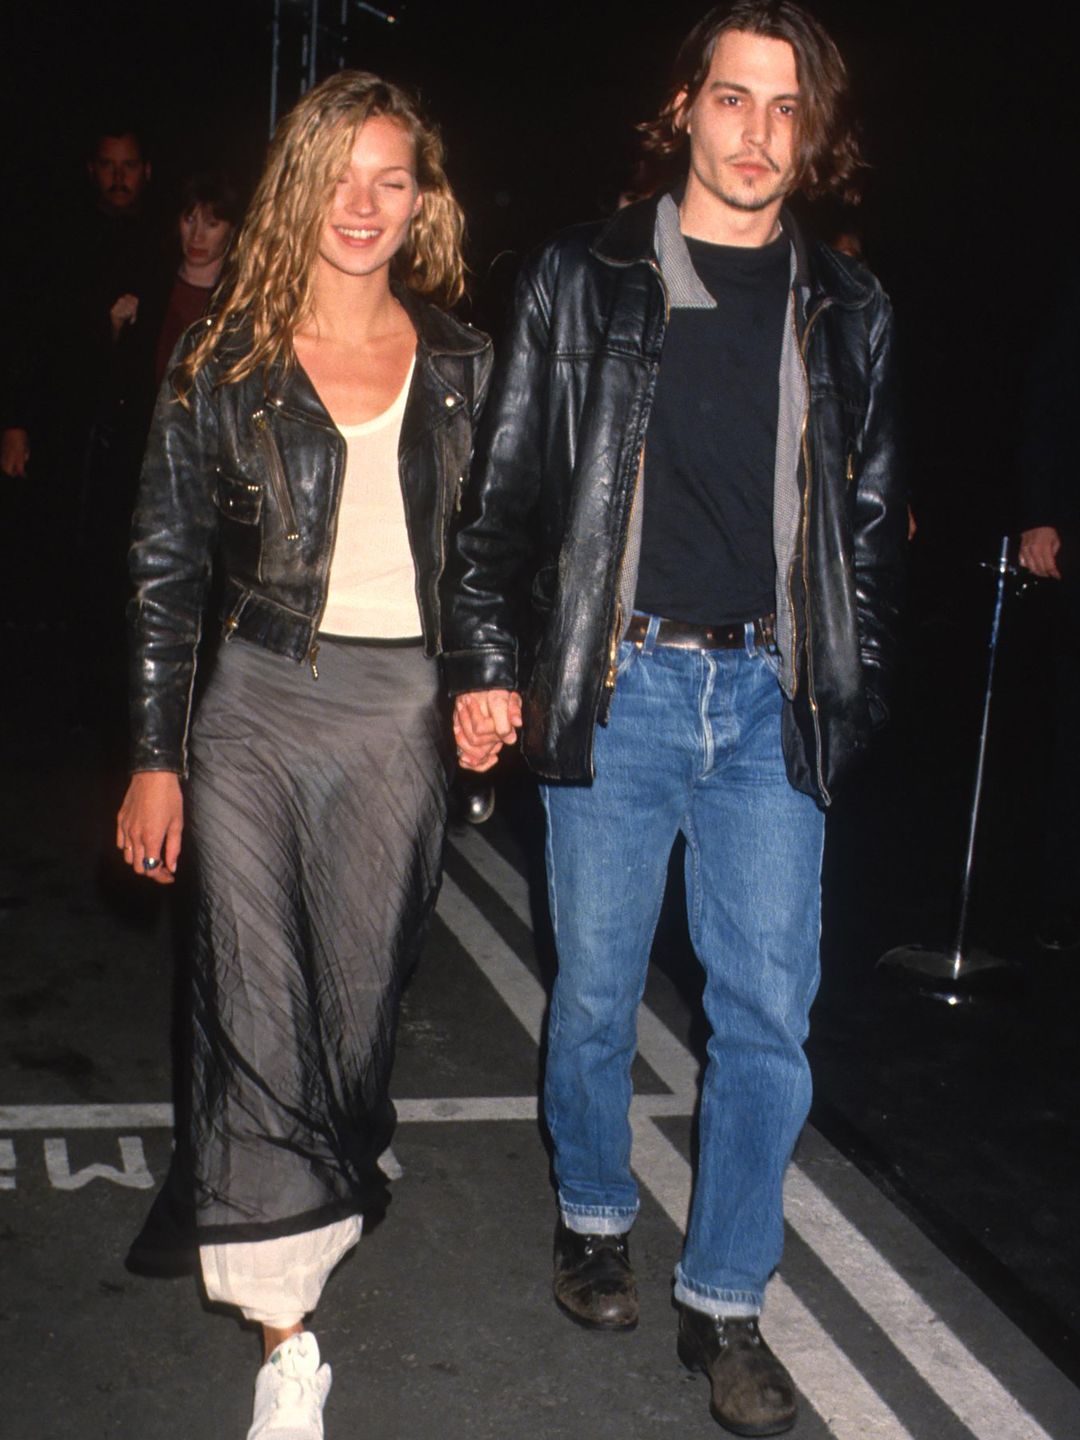 Kate Moss walks hand in hand with Johnny Depp  wearingmatching leather jackets in 1994